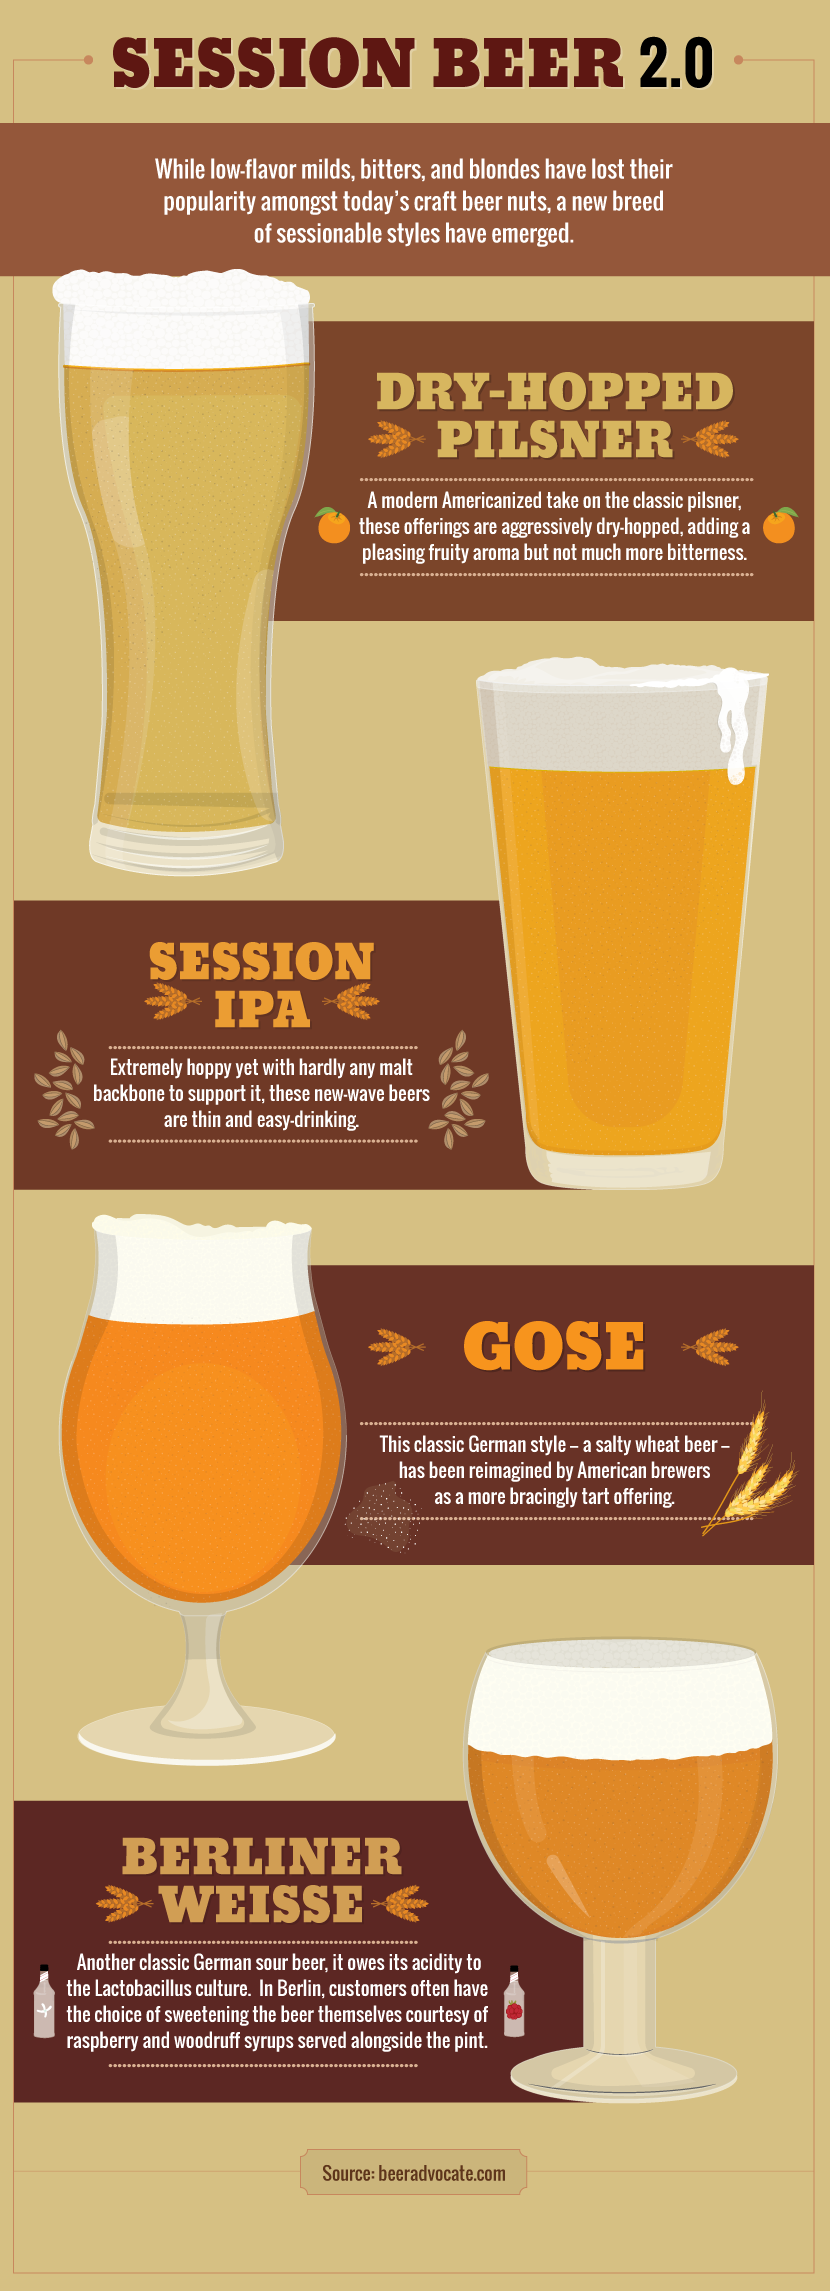 New Sessionable Beer Styles - What Makes Beer Sessionable?